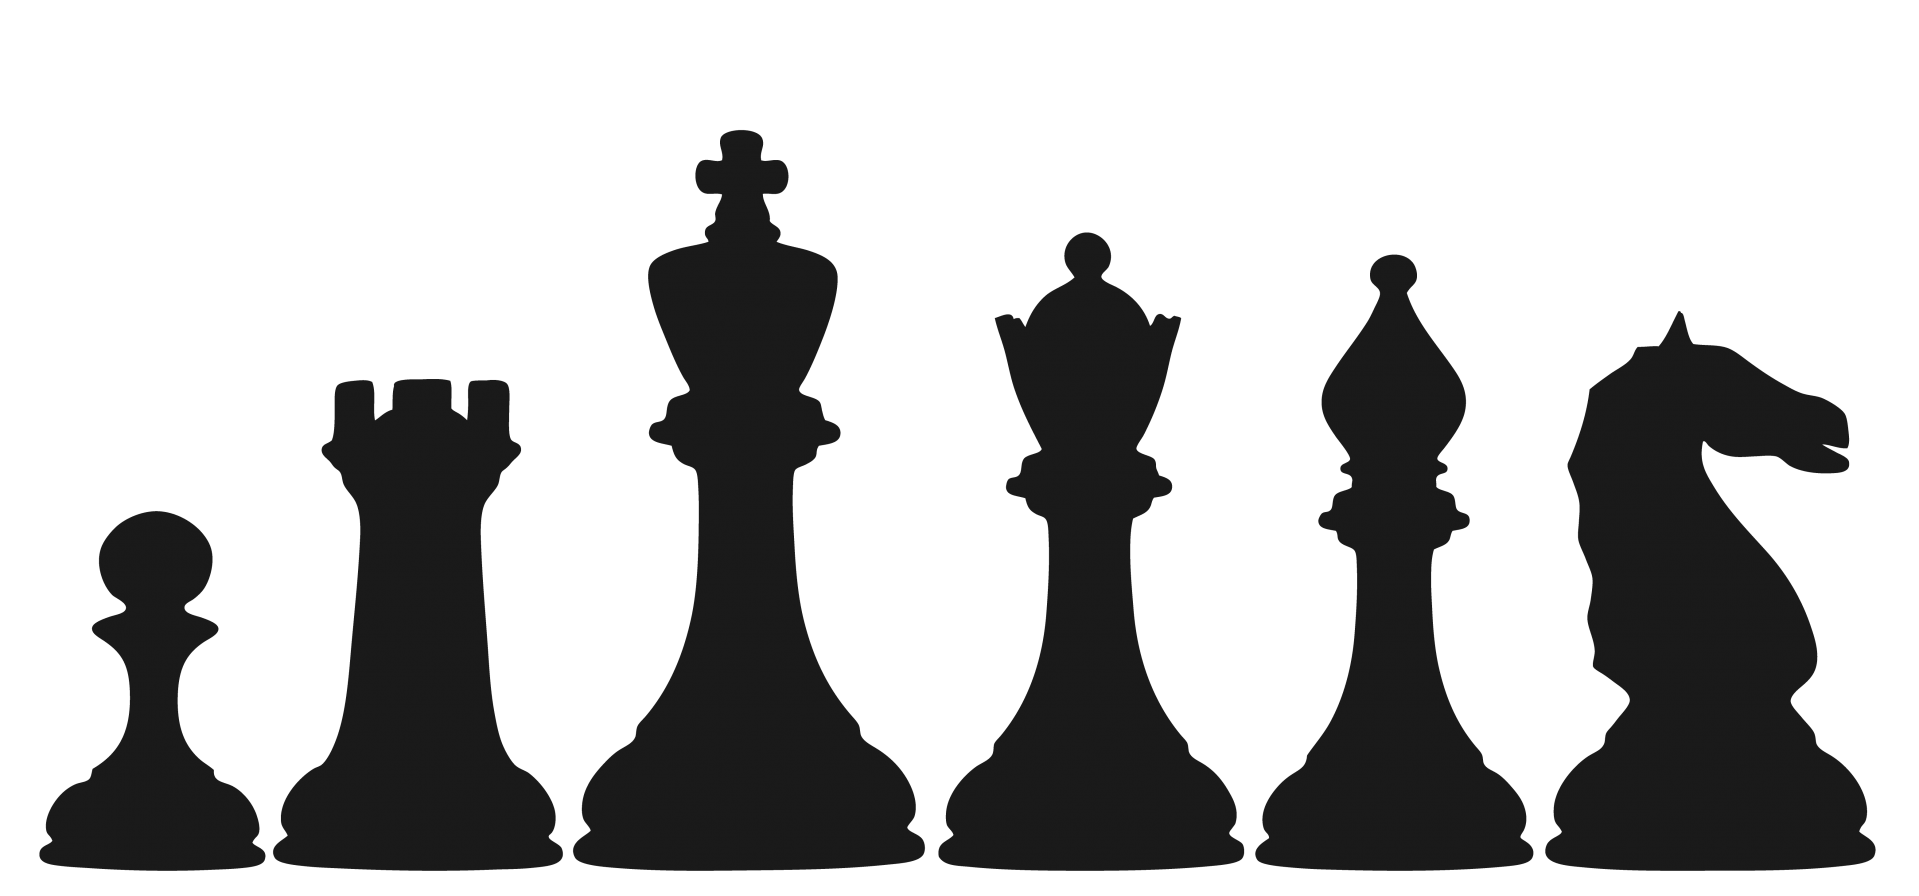 Chess Pieces Clipart